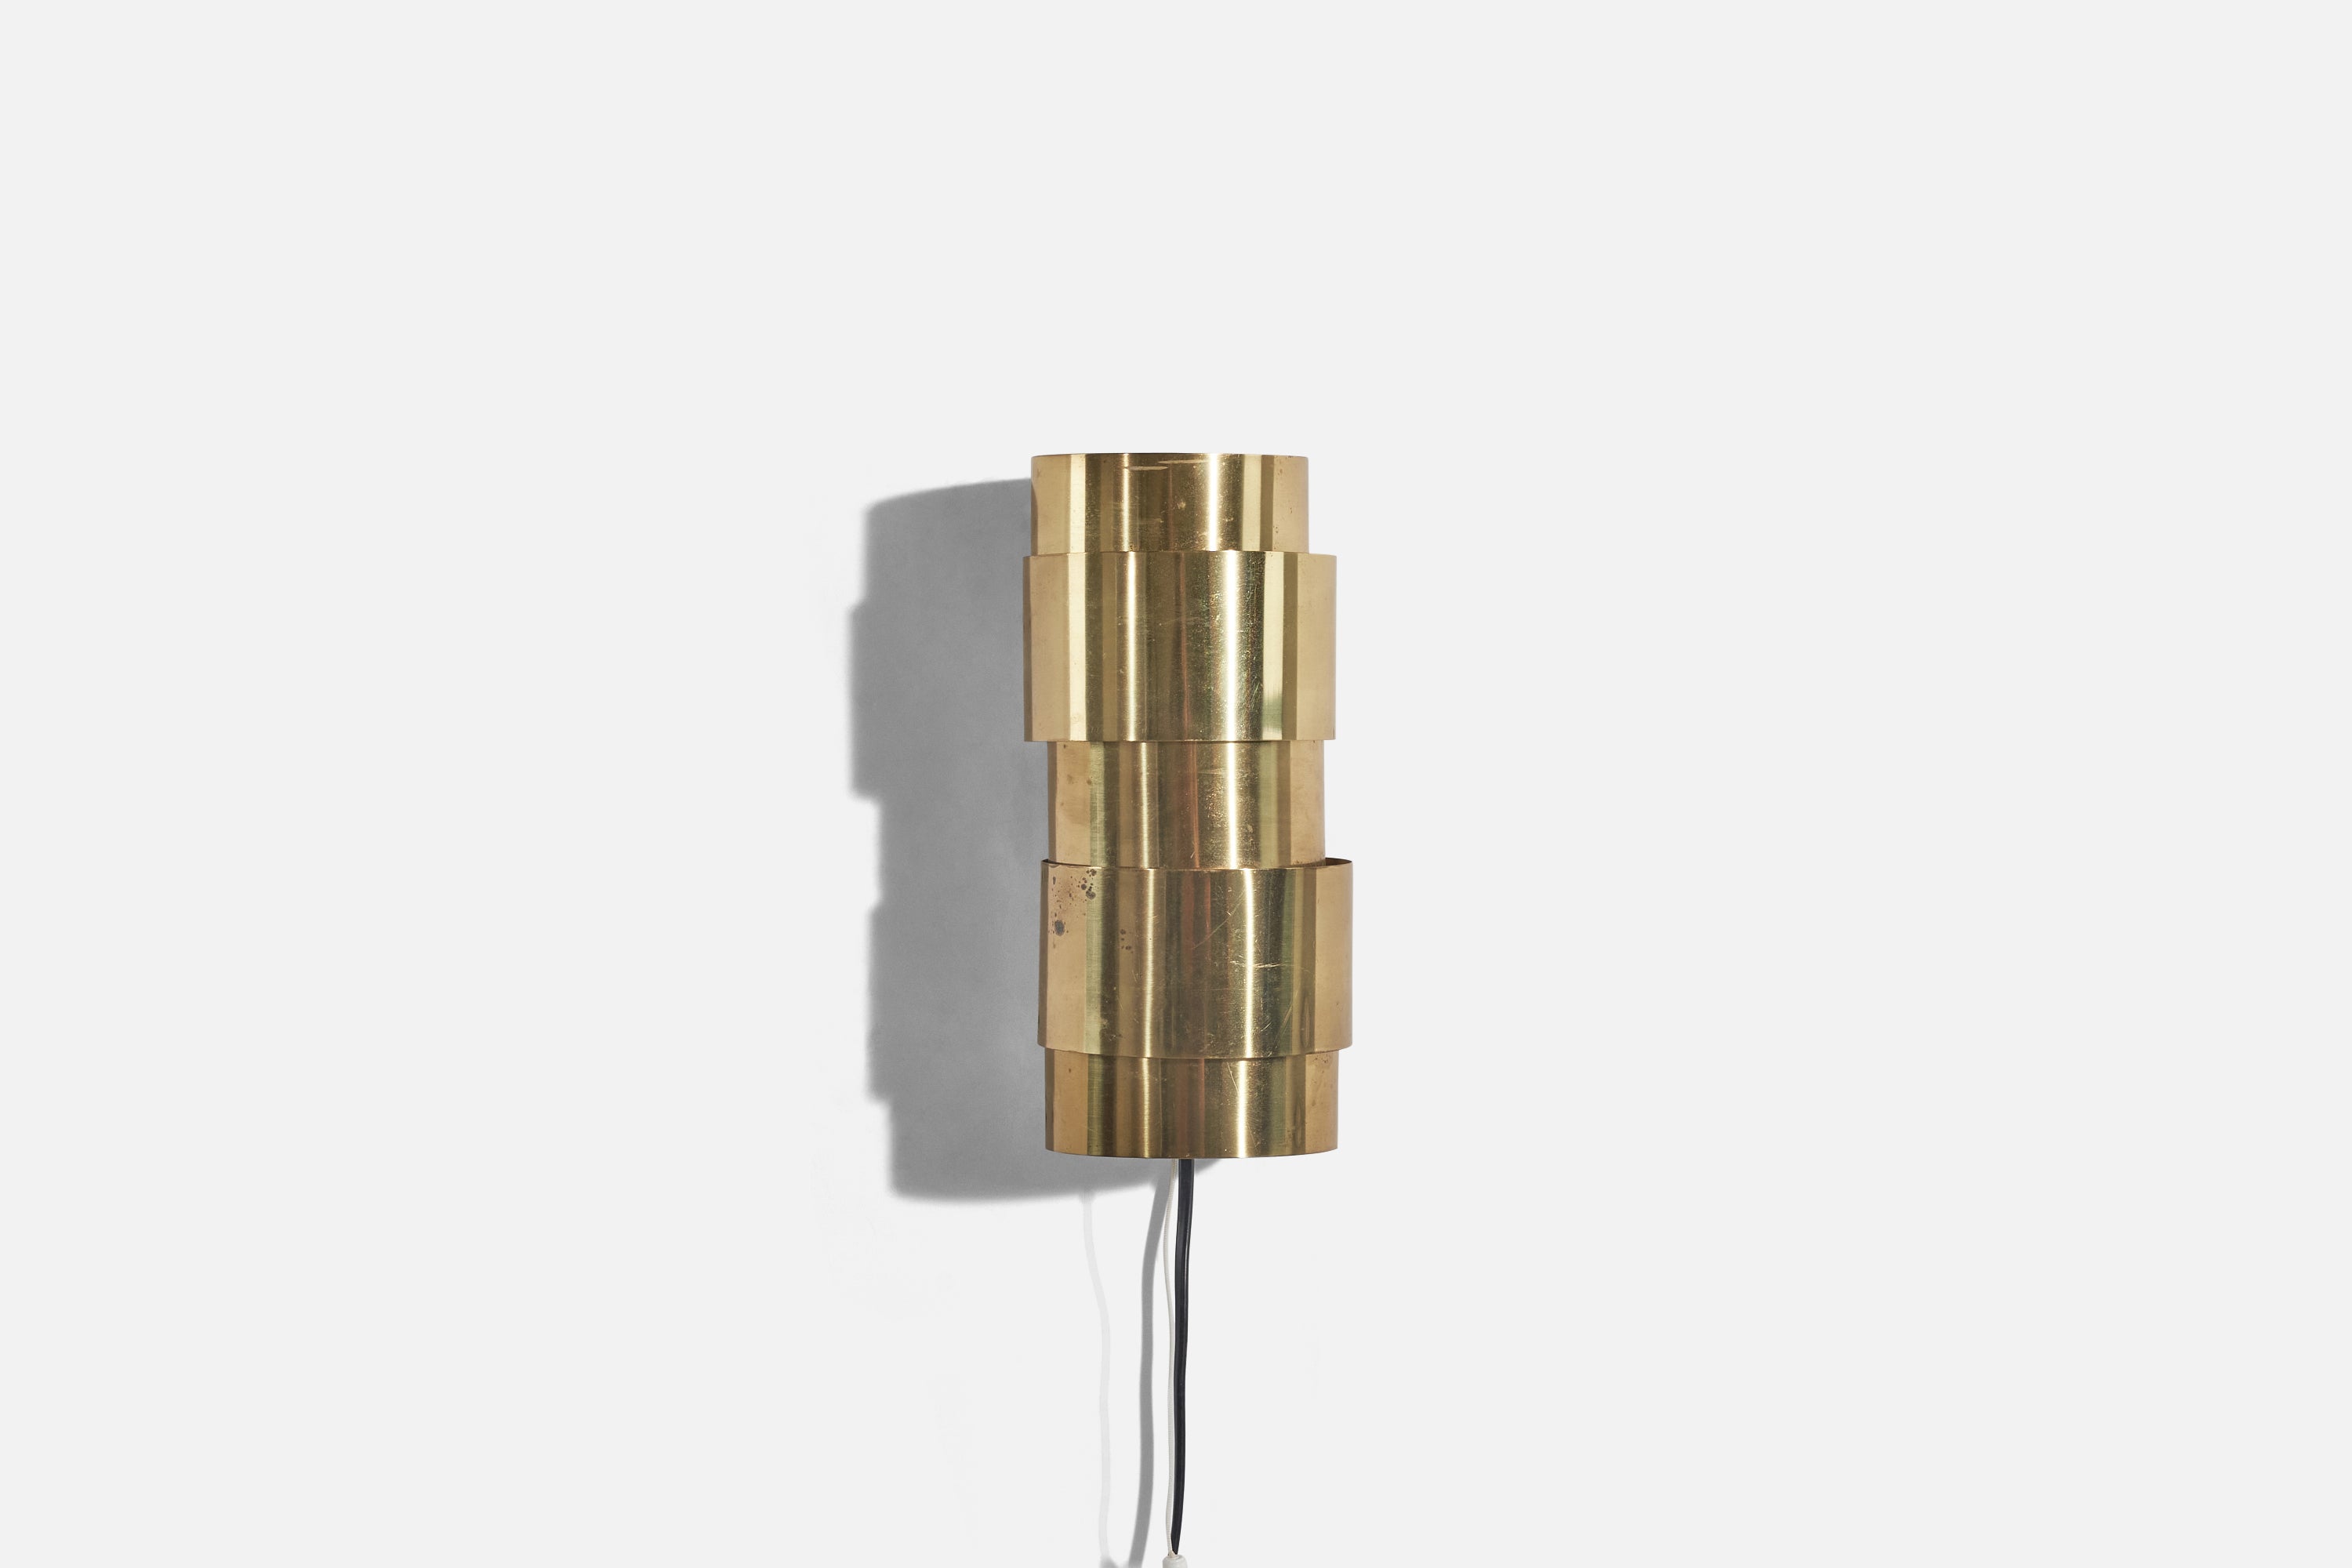 A pair of brass and teak sconces, V-155 model, designed by Hans Agne Jakobsson and produced by Hans-Agne Jakobsson AB, Markaryd, Sweden, c. 1960s.

